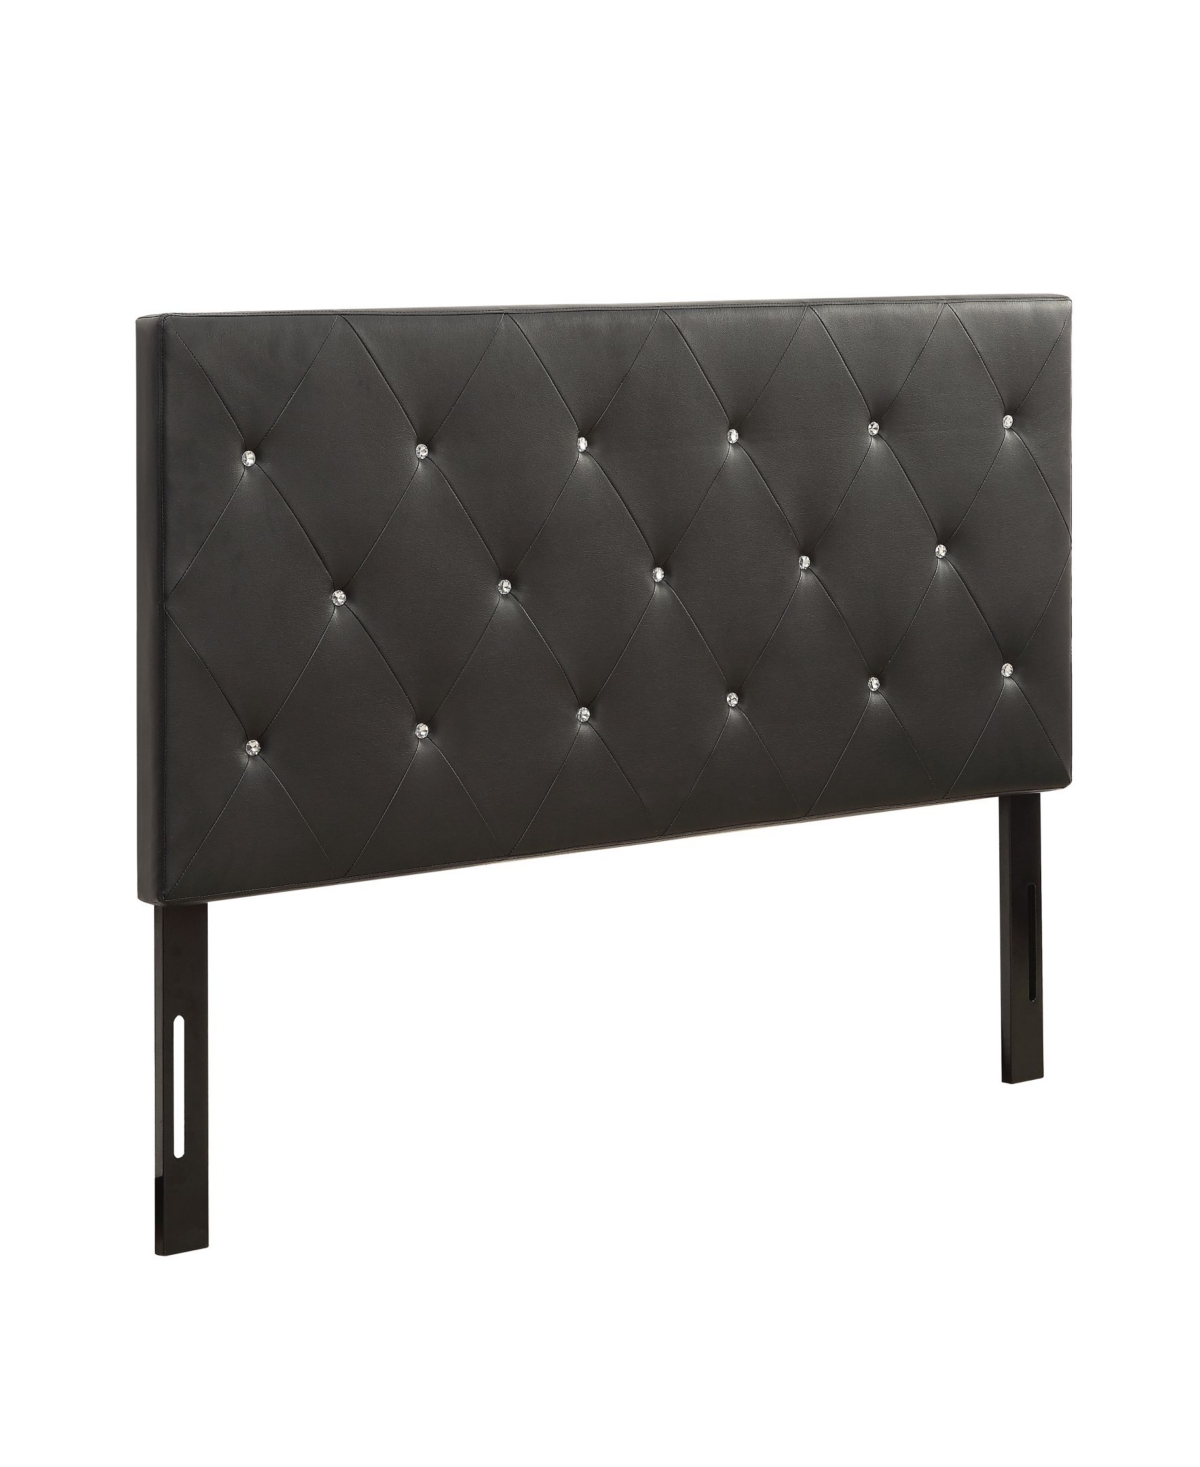 Ac Pacific Contemporary Crystal Diamond Tufted Queen Headboard In Charcoal